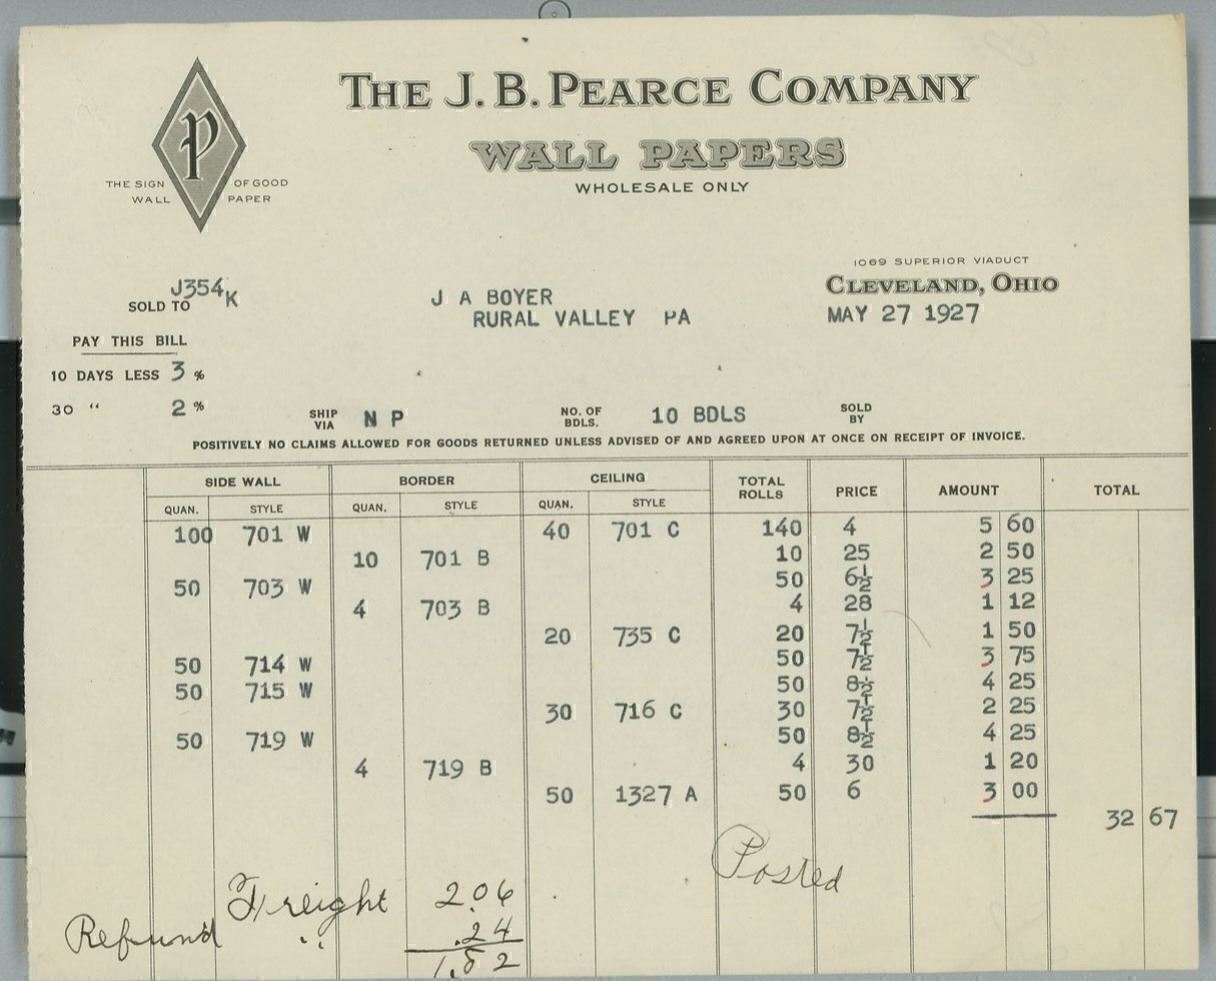 1927 J.B. Pearce Company Wall Papers Superior Viaduct Cleveland Ohio Invoice A11